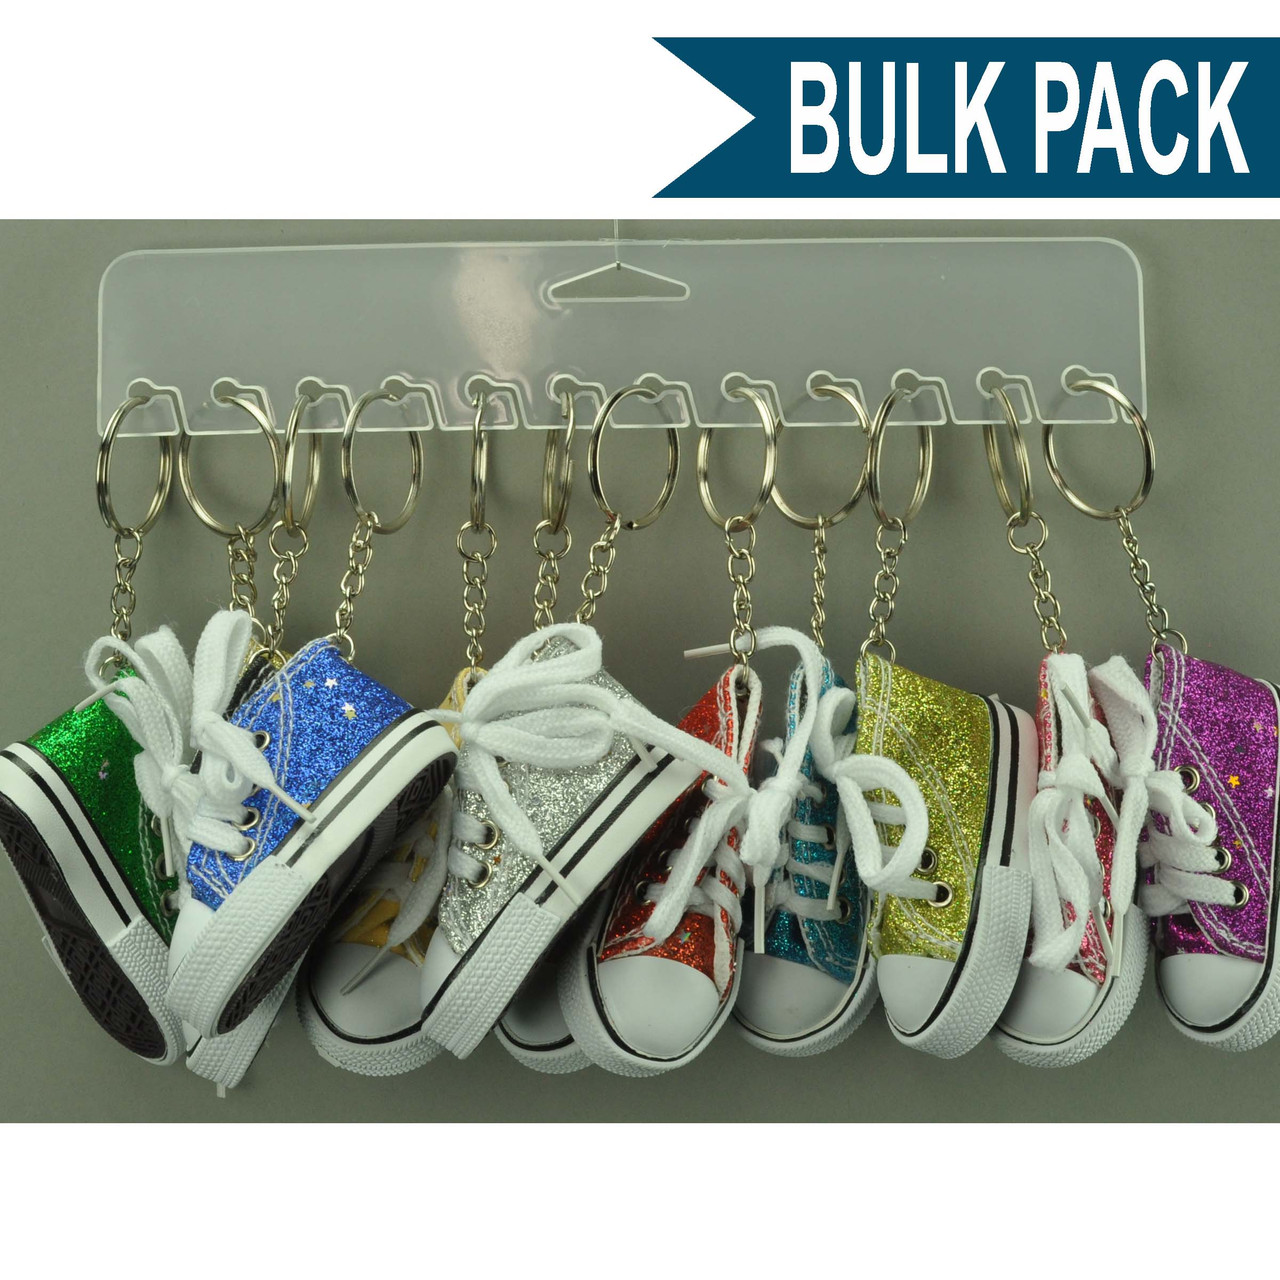 Shop for and Buy Glitter Sneaker Key Chain - Bulk Pack at .  Large selection and bulk discounts available.